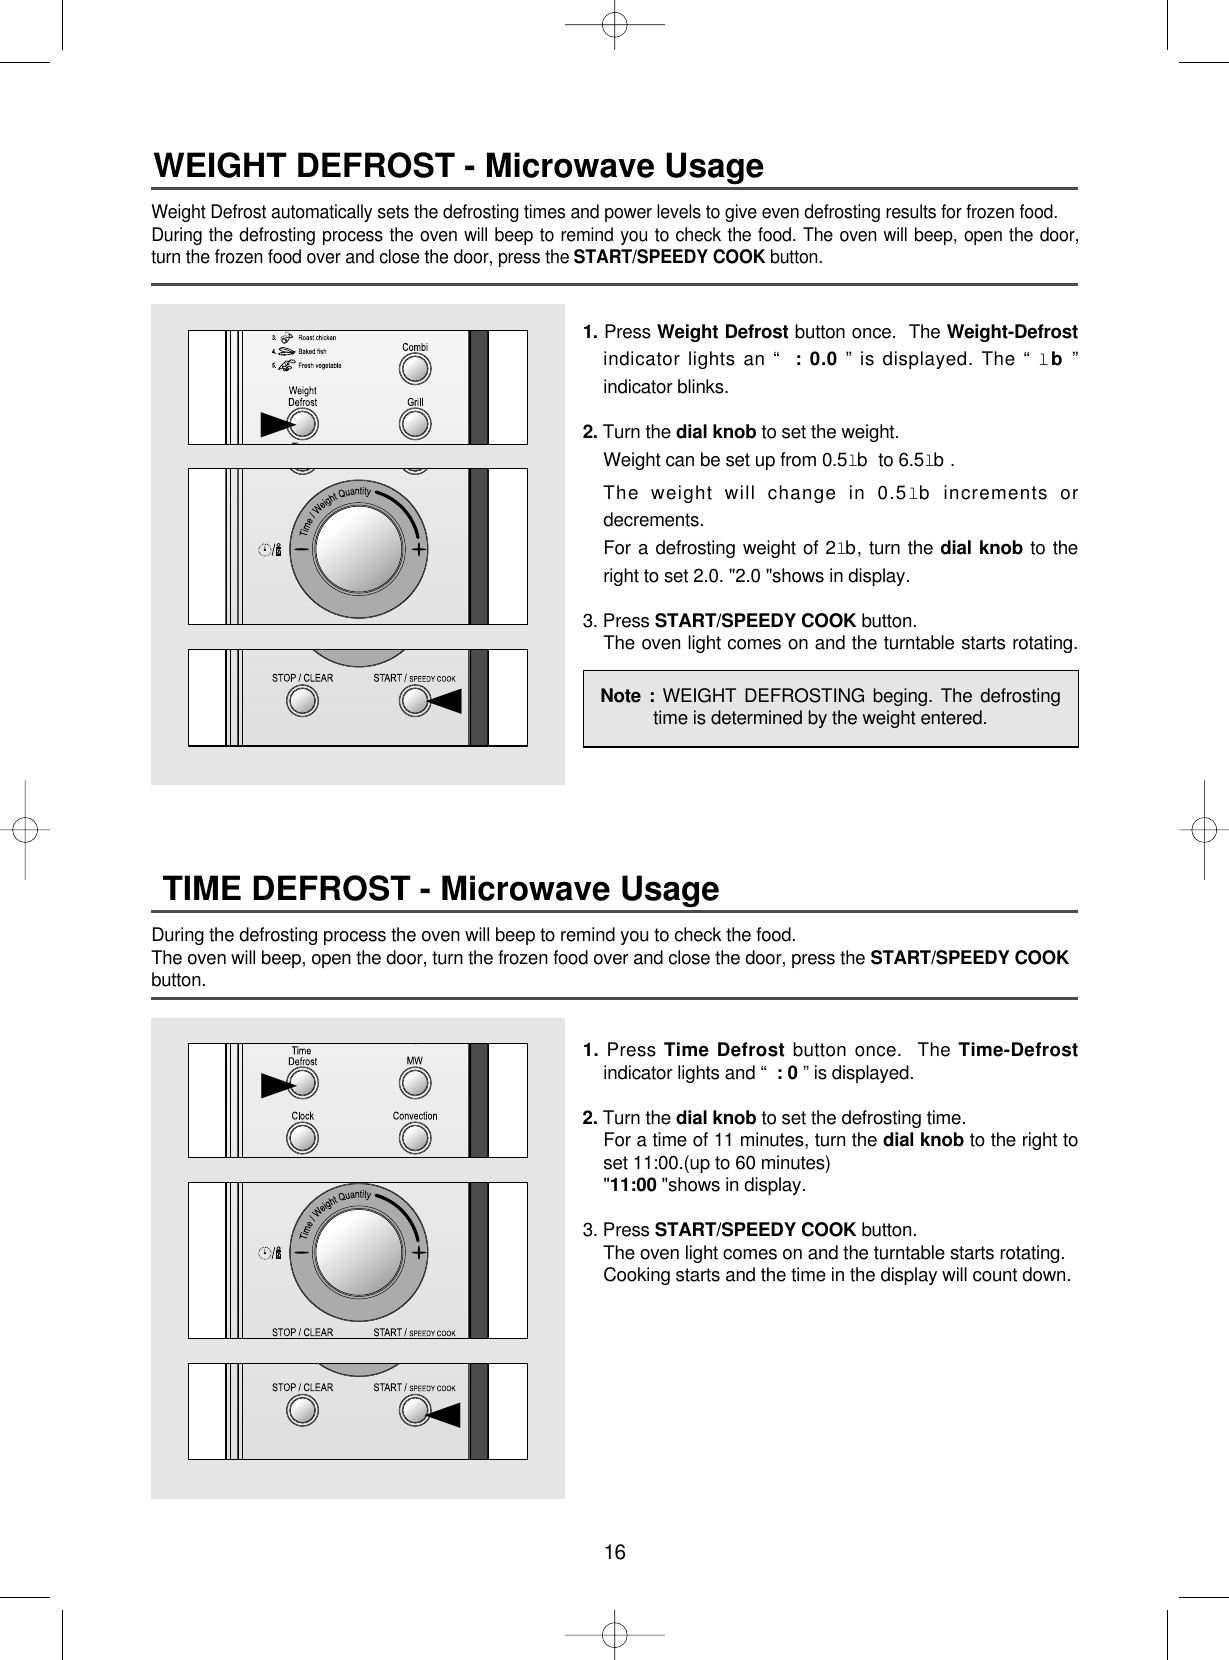 16Weight Defrost automatically sets the defrosting times and power levels to give even defrosting results for frozen food.During the defrosting process the oven will beep to remind you to check the food. The oven will beep, open the door,turn the frozen food over and close the door, press the START/SPEEDY COOK button.WEIGHT DEFROST - Microwave Usage1. Press Weight Defrost button once.  The Weight-Defrostindicator lights an “ : 0.0 ” is displayed. The “ lb”indicator blinks.2. Turn the dial knob to set the weight.Weight can be set up from 0.5lb to 6.5lb.The weight will change in 0.5lb increments ordecrements.For a defrosting weight of 2lb, turn the dial knob to theright to set 2.0. &quot;2.0 &quot;shows in display.3. Press START/SPEEDY COOK button.The oven light comes on and the turntable starts rotating.▲▲During the defrosting process the oven will beep to remind you to check the food.The oven will beep, open the door, turn the frozen food over and close the door, press the START/SPEEDY COOKbutton.TIME DEFROST - Microwave Usage1. Press Time Defrost button once.  The Time-Defrostindicator lights and “ : 0 ” is displayed.2. Turn the dial knob to set the defrosting time.For a time of 11 minutes, turn the dial knob to the right toset 11:00.(up to 60 minutes)&quot;11:00 &quot;shows in display.3. Press START/SPEEDY COOK button.The oven light comes on and the turntable starts rotating.Cooking starts and the time in the display will count down.▲▲Note : WEIGHT DEFROSTING beging. The defrostingtime is determined by the weight entered.